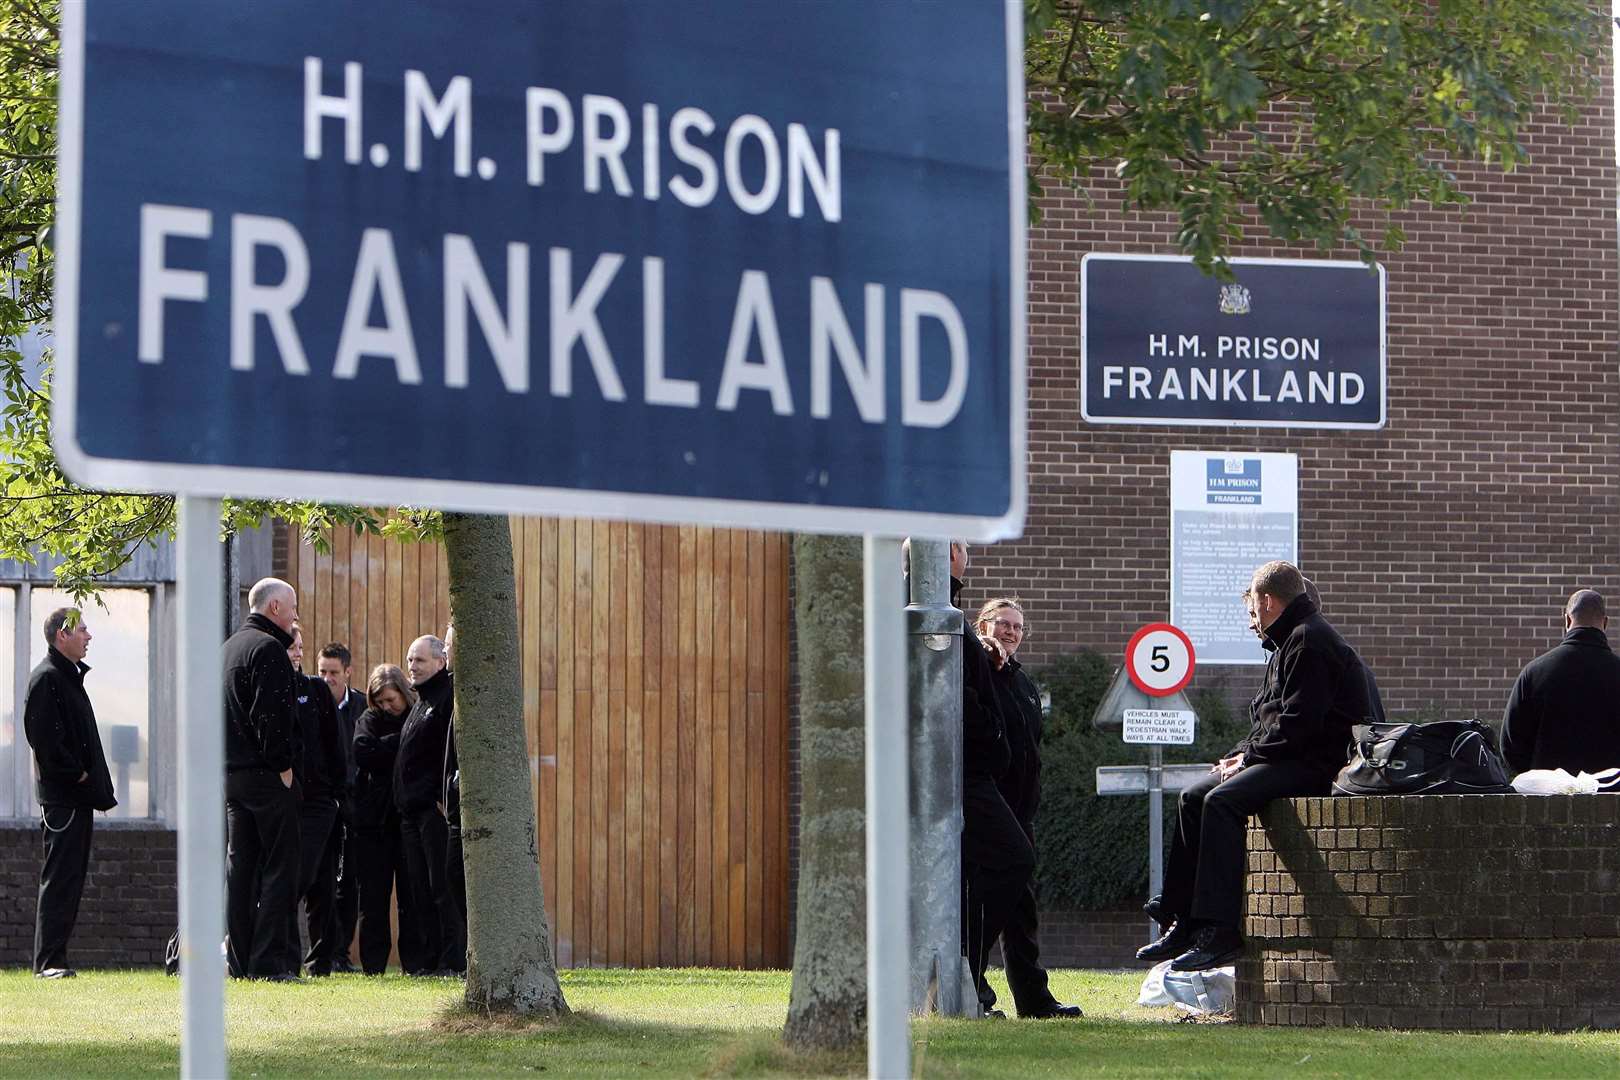 The assaults took place at Frankland Prison in County Durham (Owen Humphreys/PA)